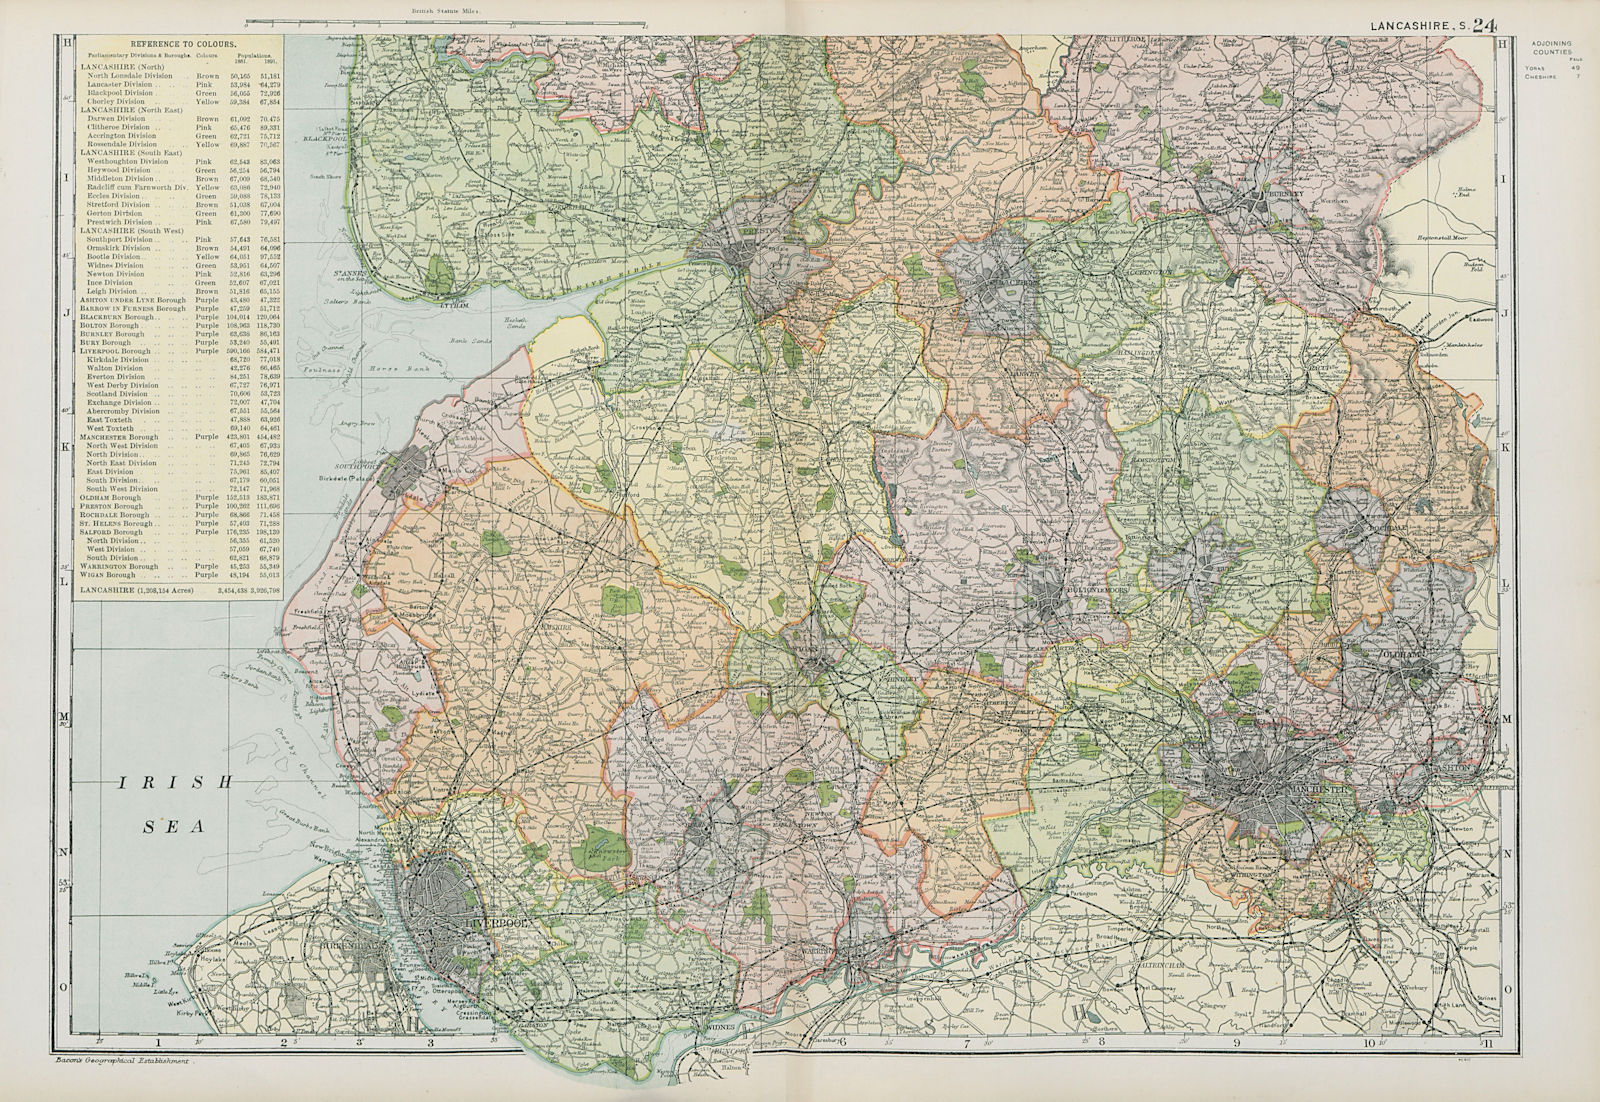 Associate Product LANCASHIRE (SOUTH) . Showing Parliamentary divisions & parks. BACON 1900 map